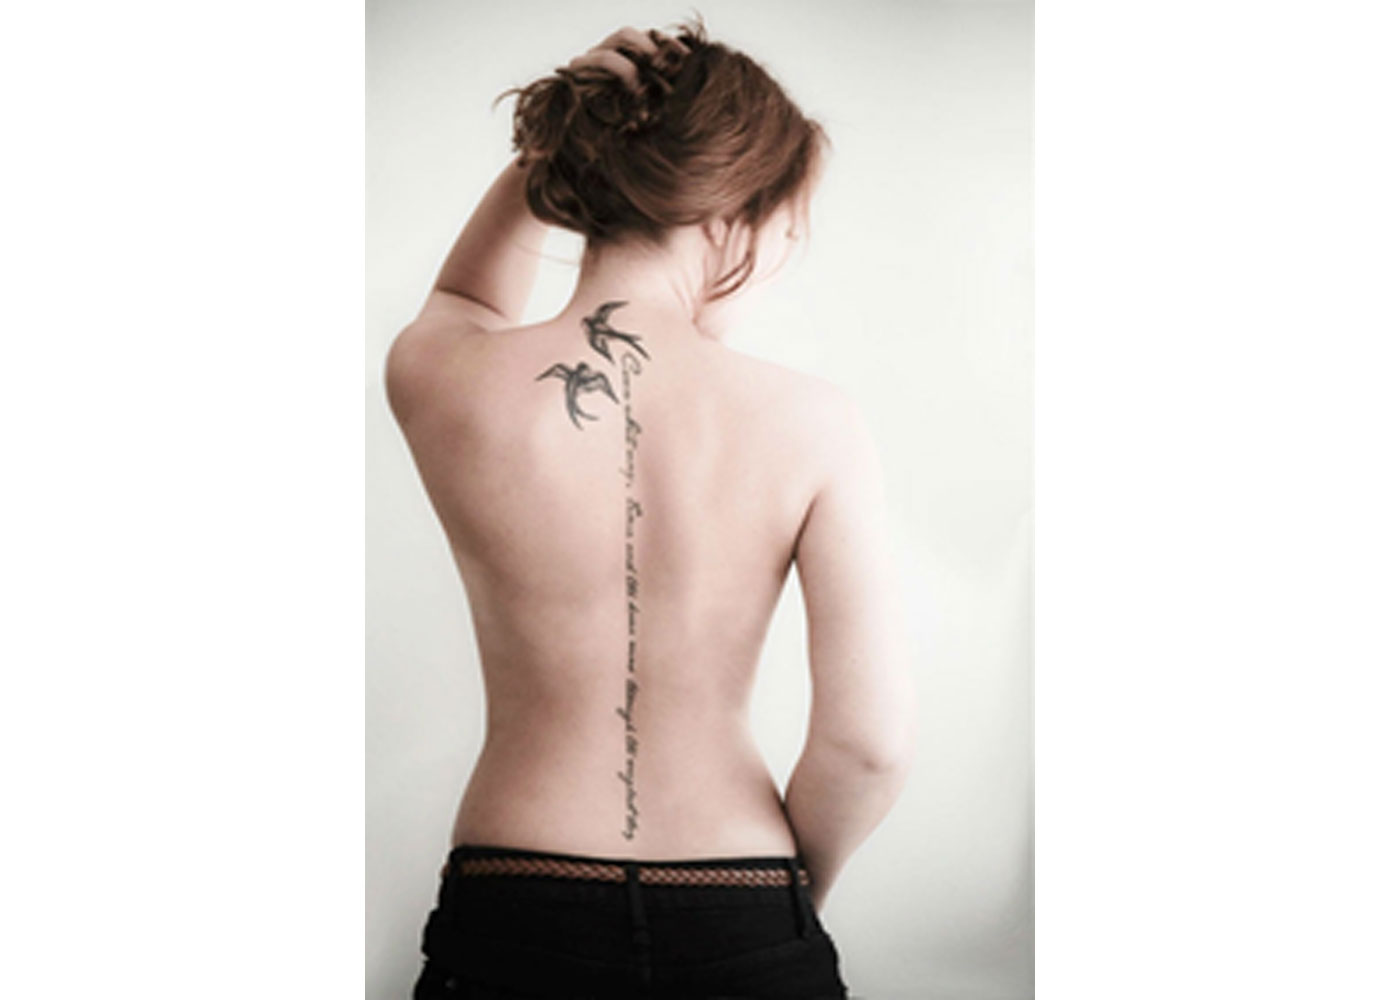 70+ Spine Tattoo ideas for women from instagram | Spine tattoos, Spine  tattoos for women, Trendy tattoos